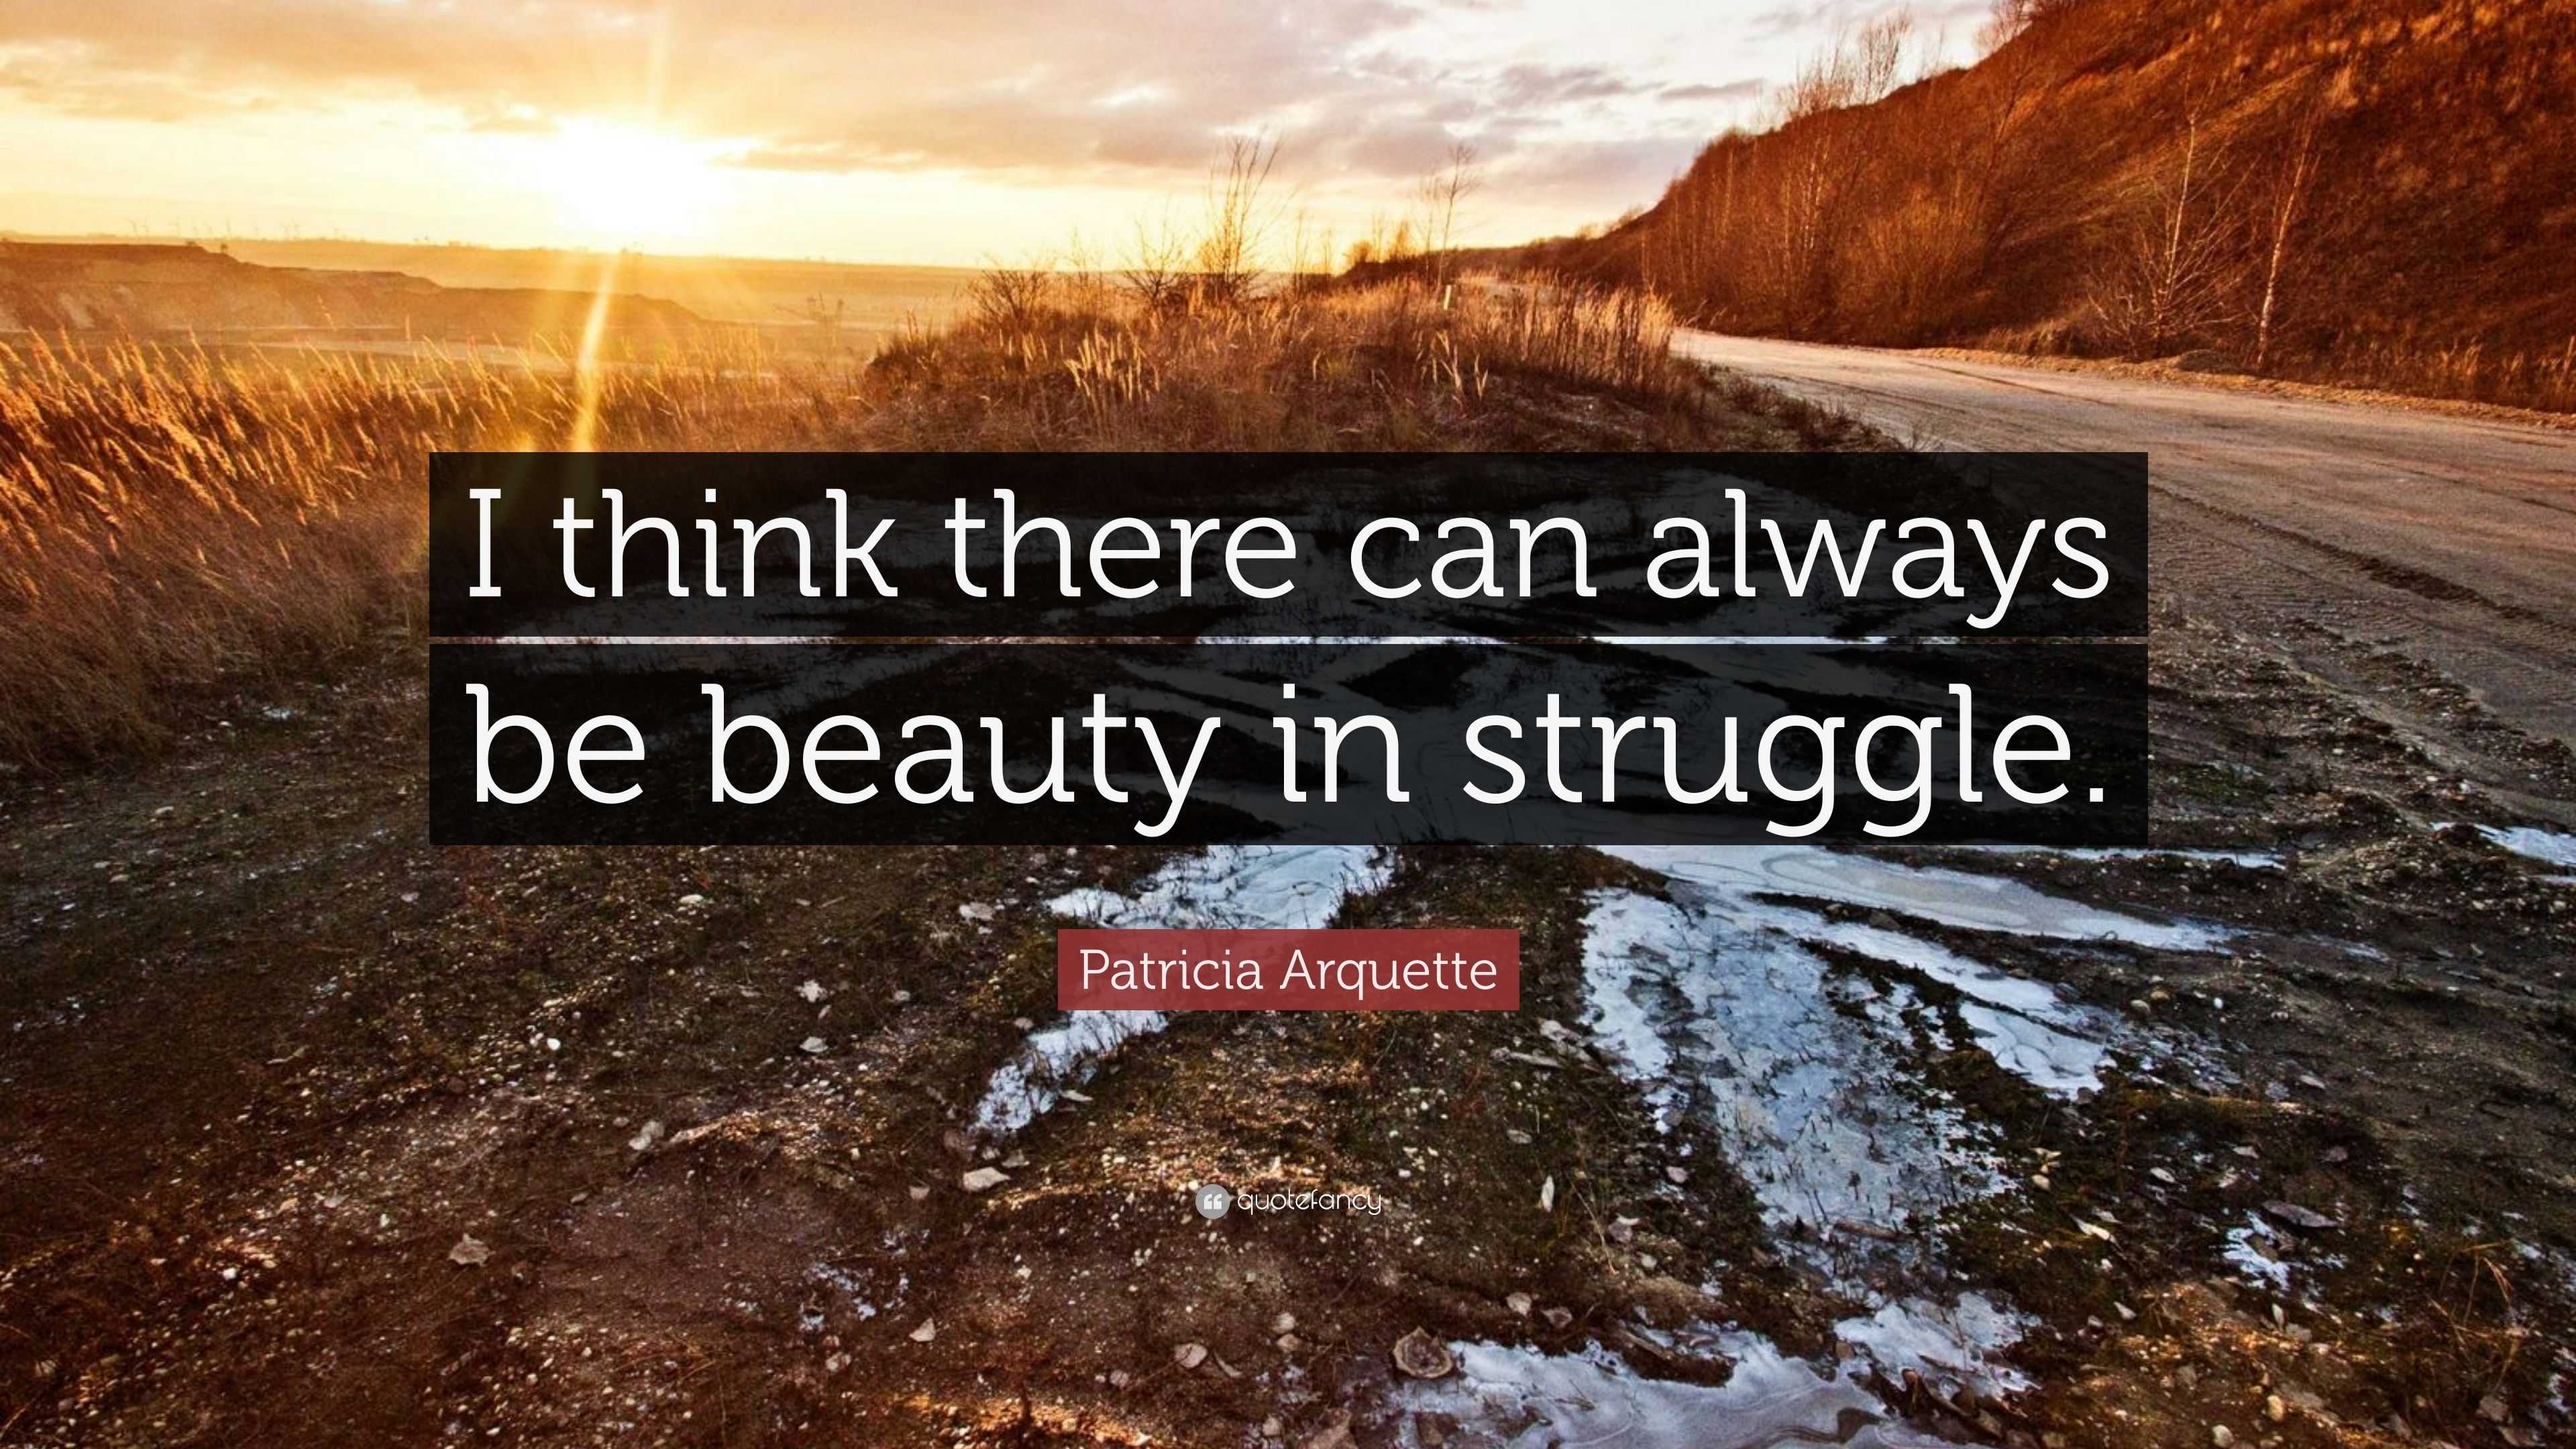 Patricia Arquette Quote: “I think there can always be beauty in struggle.”